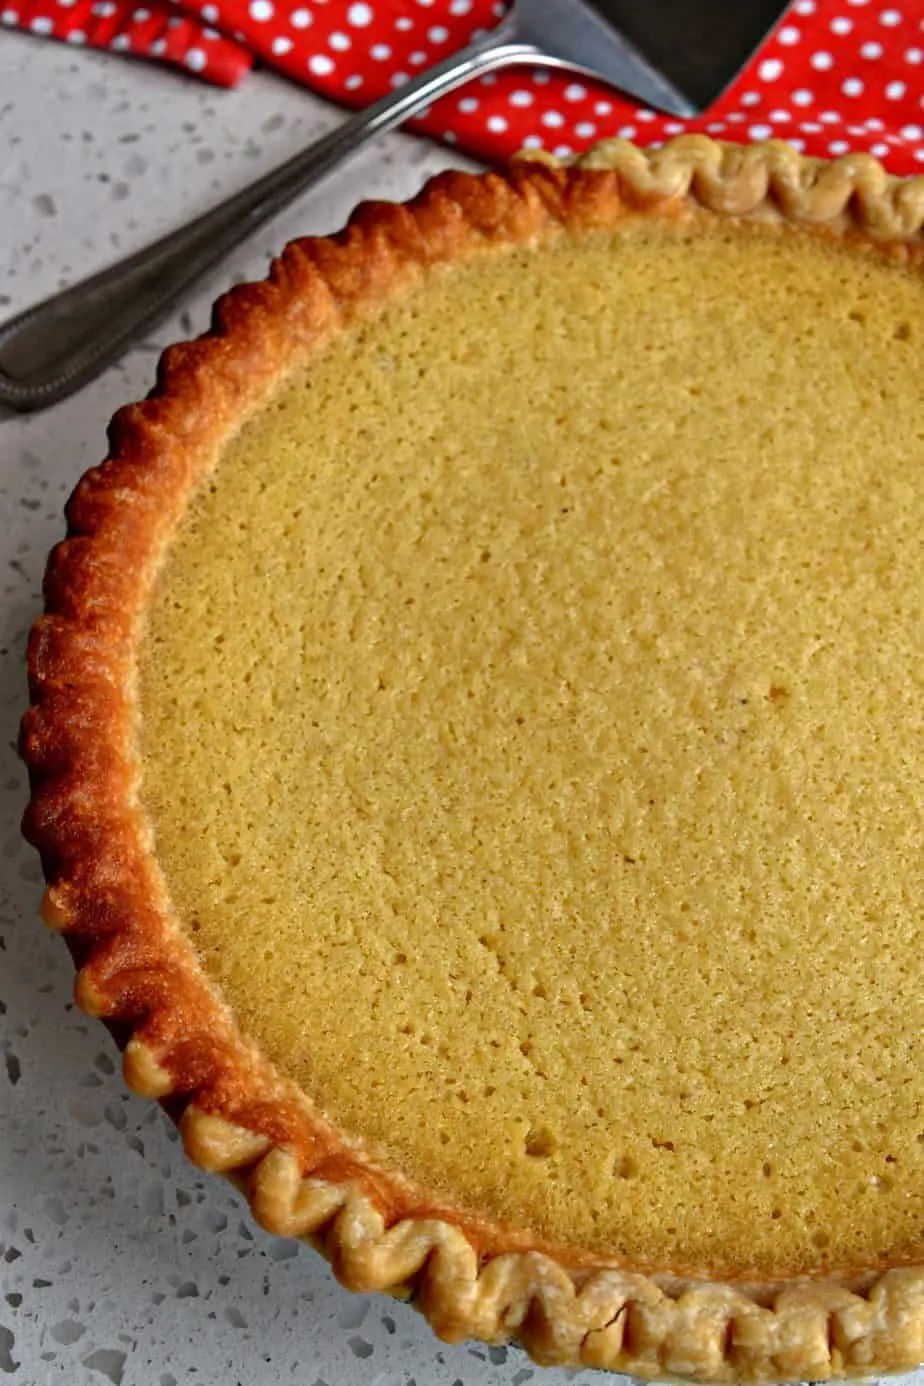 Sweet and creamy buttermilk pie is an easy pie to make for family gatherings, potlucks, or holidays